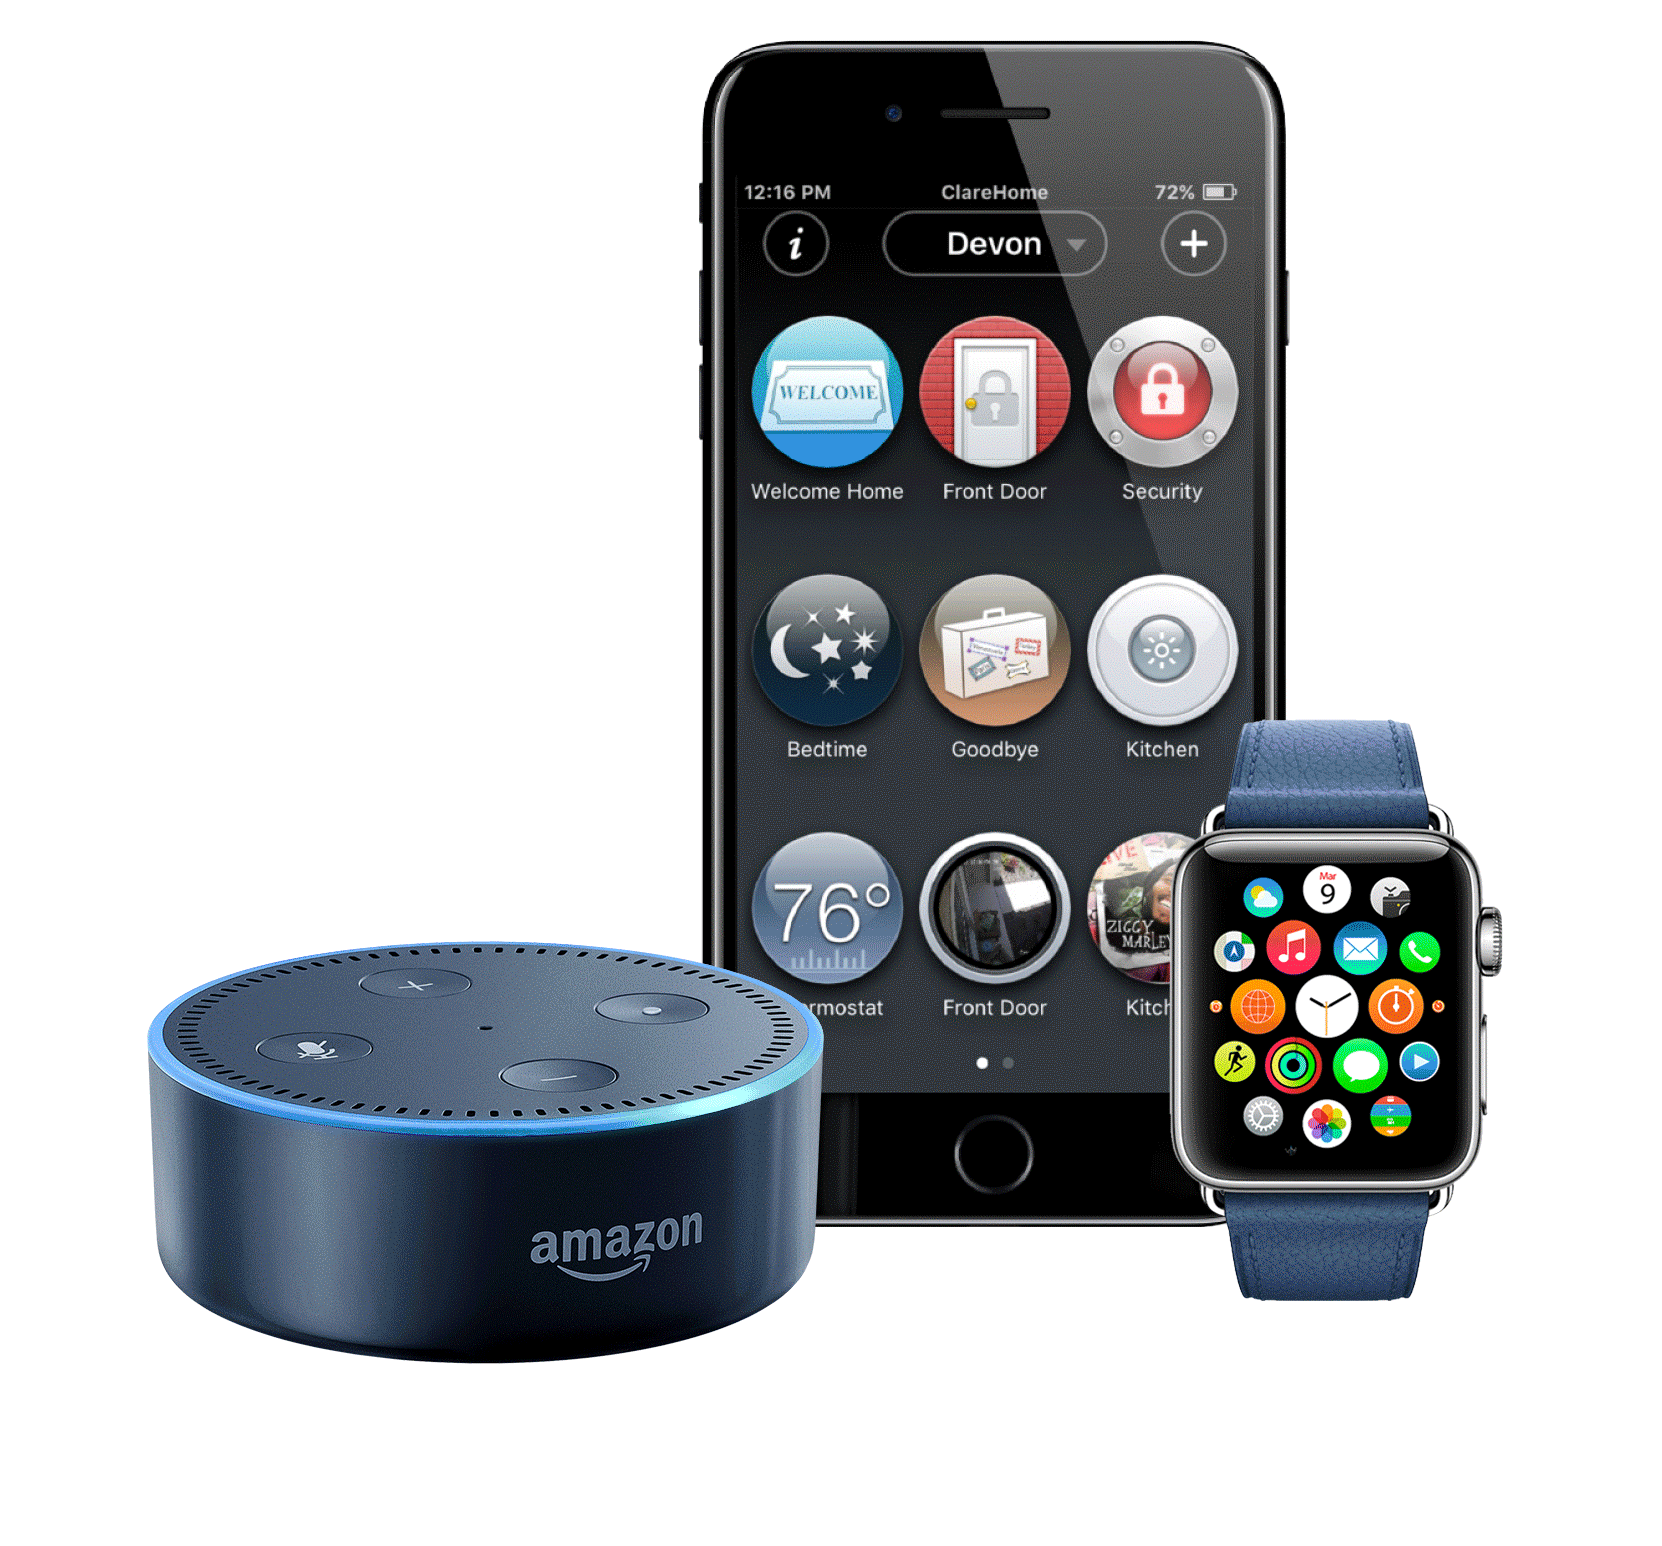 Animated iWatch and Echo Dot